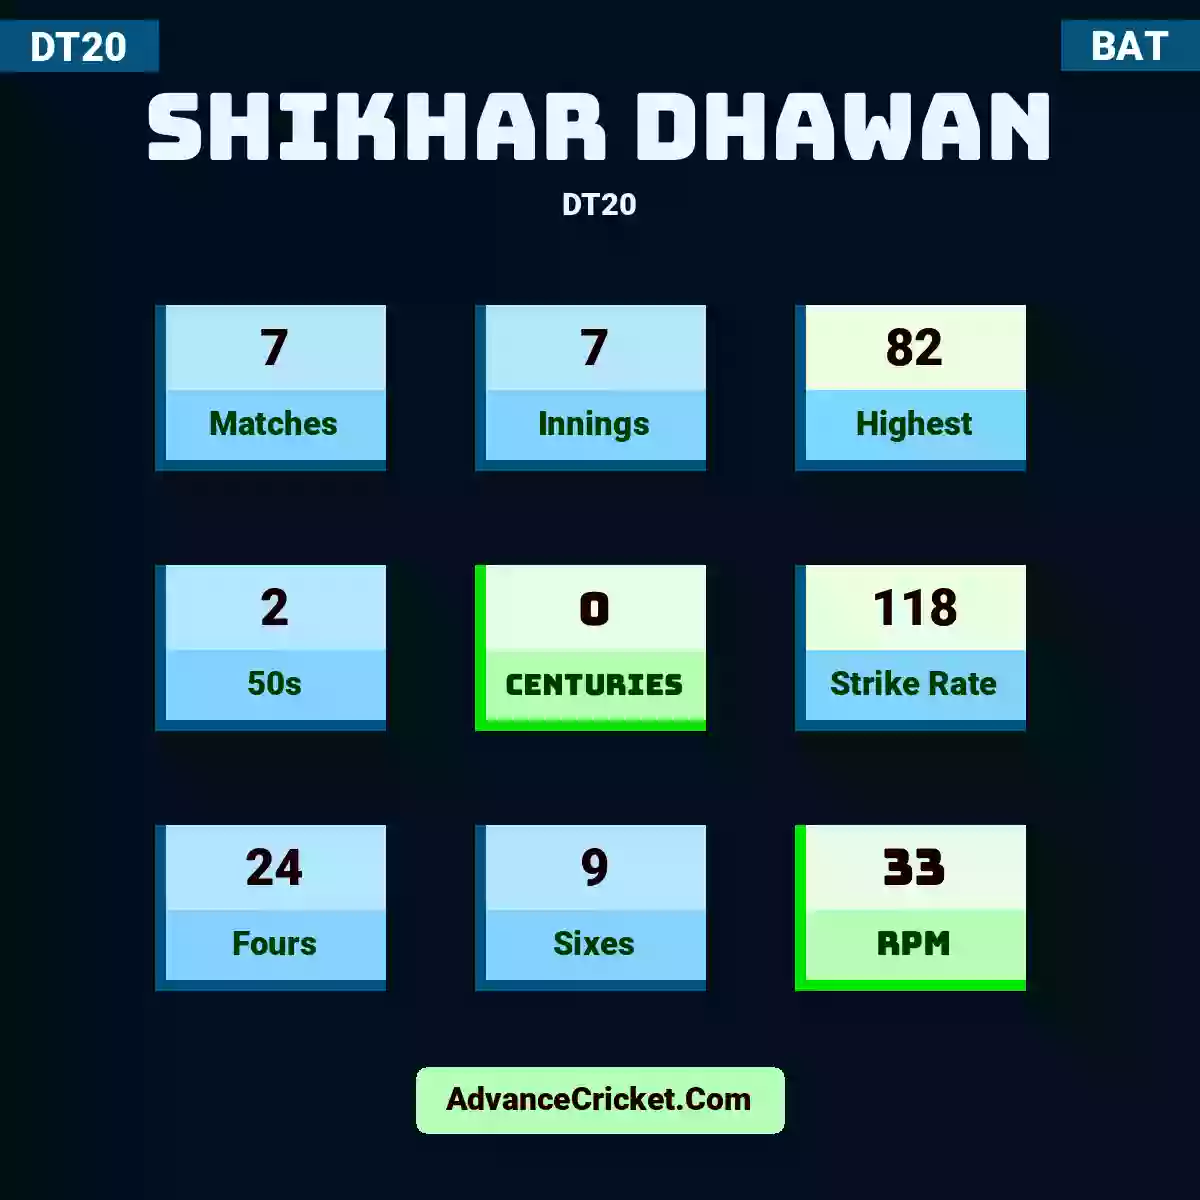 Shikhar Dhawan DT20 , Shikhar Dhawan played 7 matches, scored 82 runs as highest, 2 half-centuries, and 0 centuries, with a strike rate of 118. S.Dhawan hit 24 fours and 9 sixes, with an RPM of 33.